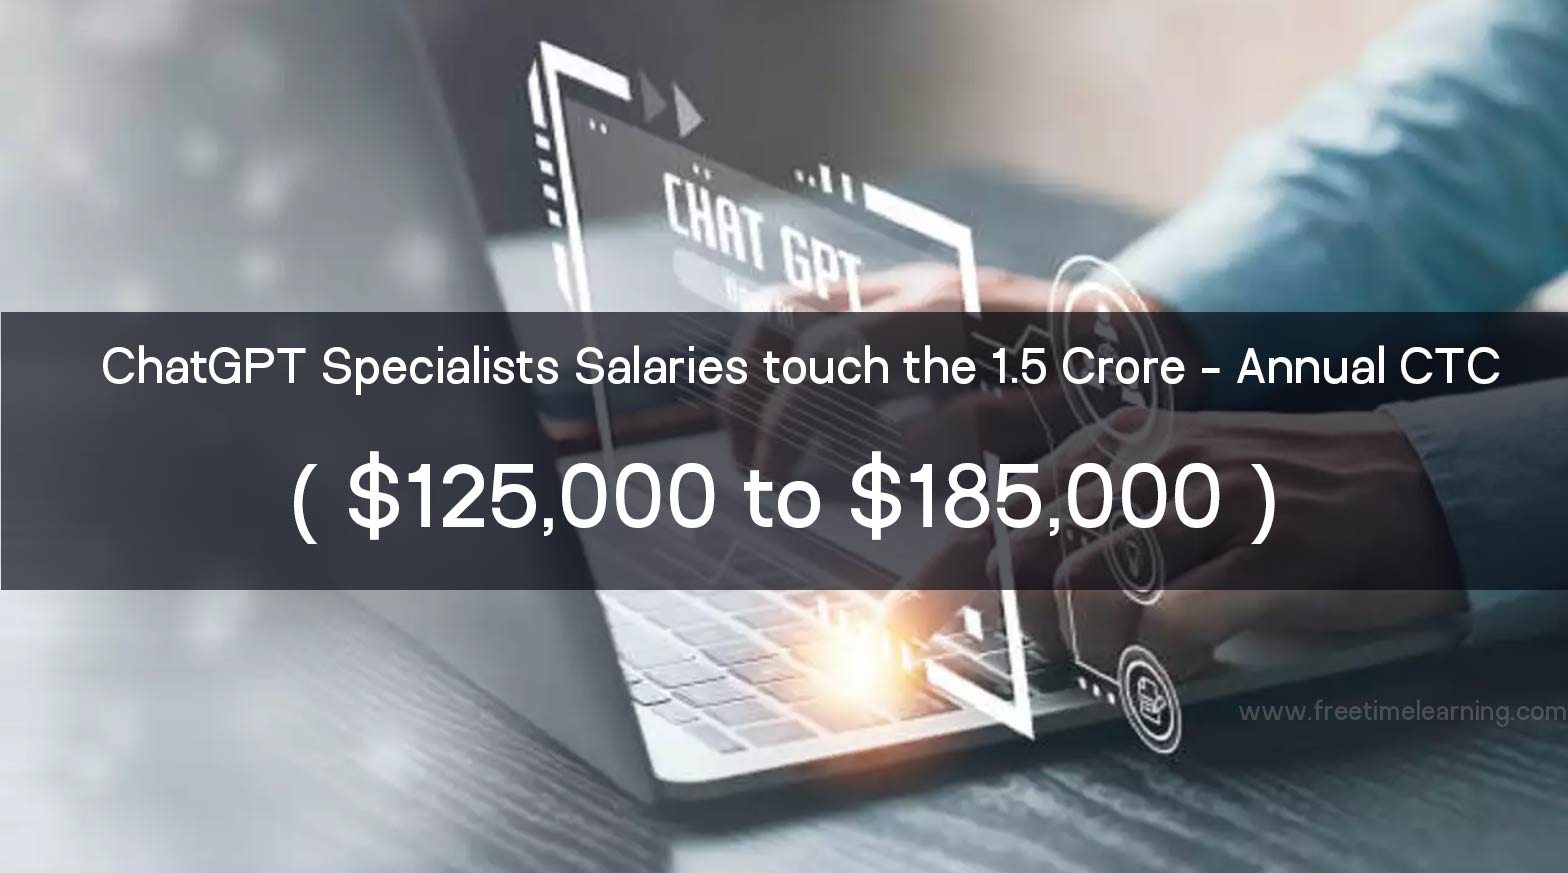 ChatGPT Specialists Salaries could soon touch the 1.5 Crore Annual CTC